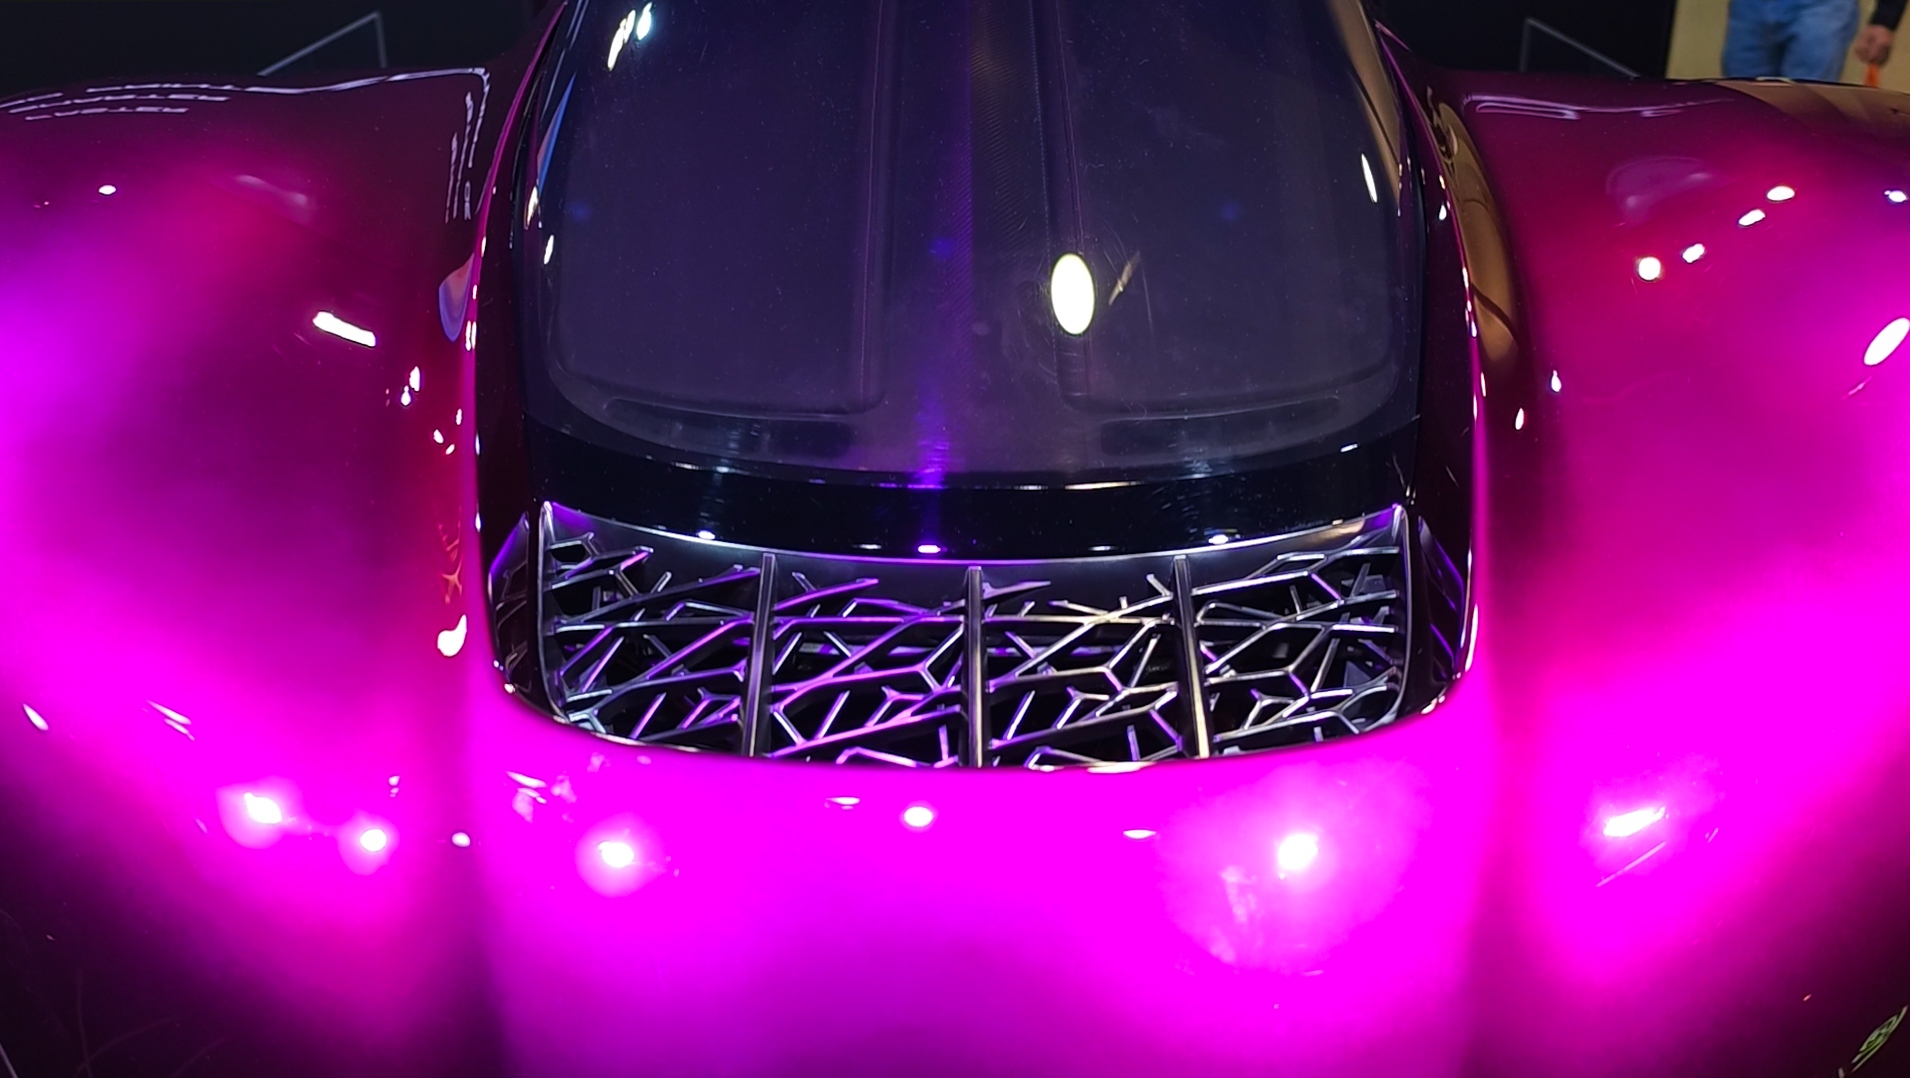 This Incredible Sports Car Was 3D Printed From Laser-Melted Metal